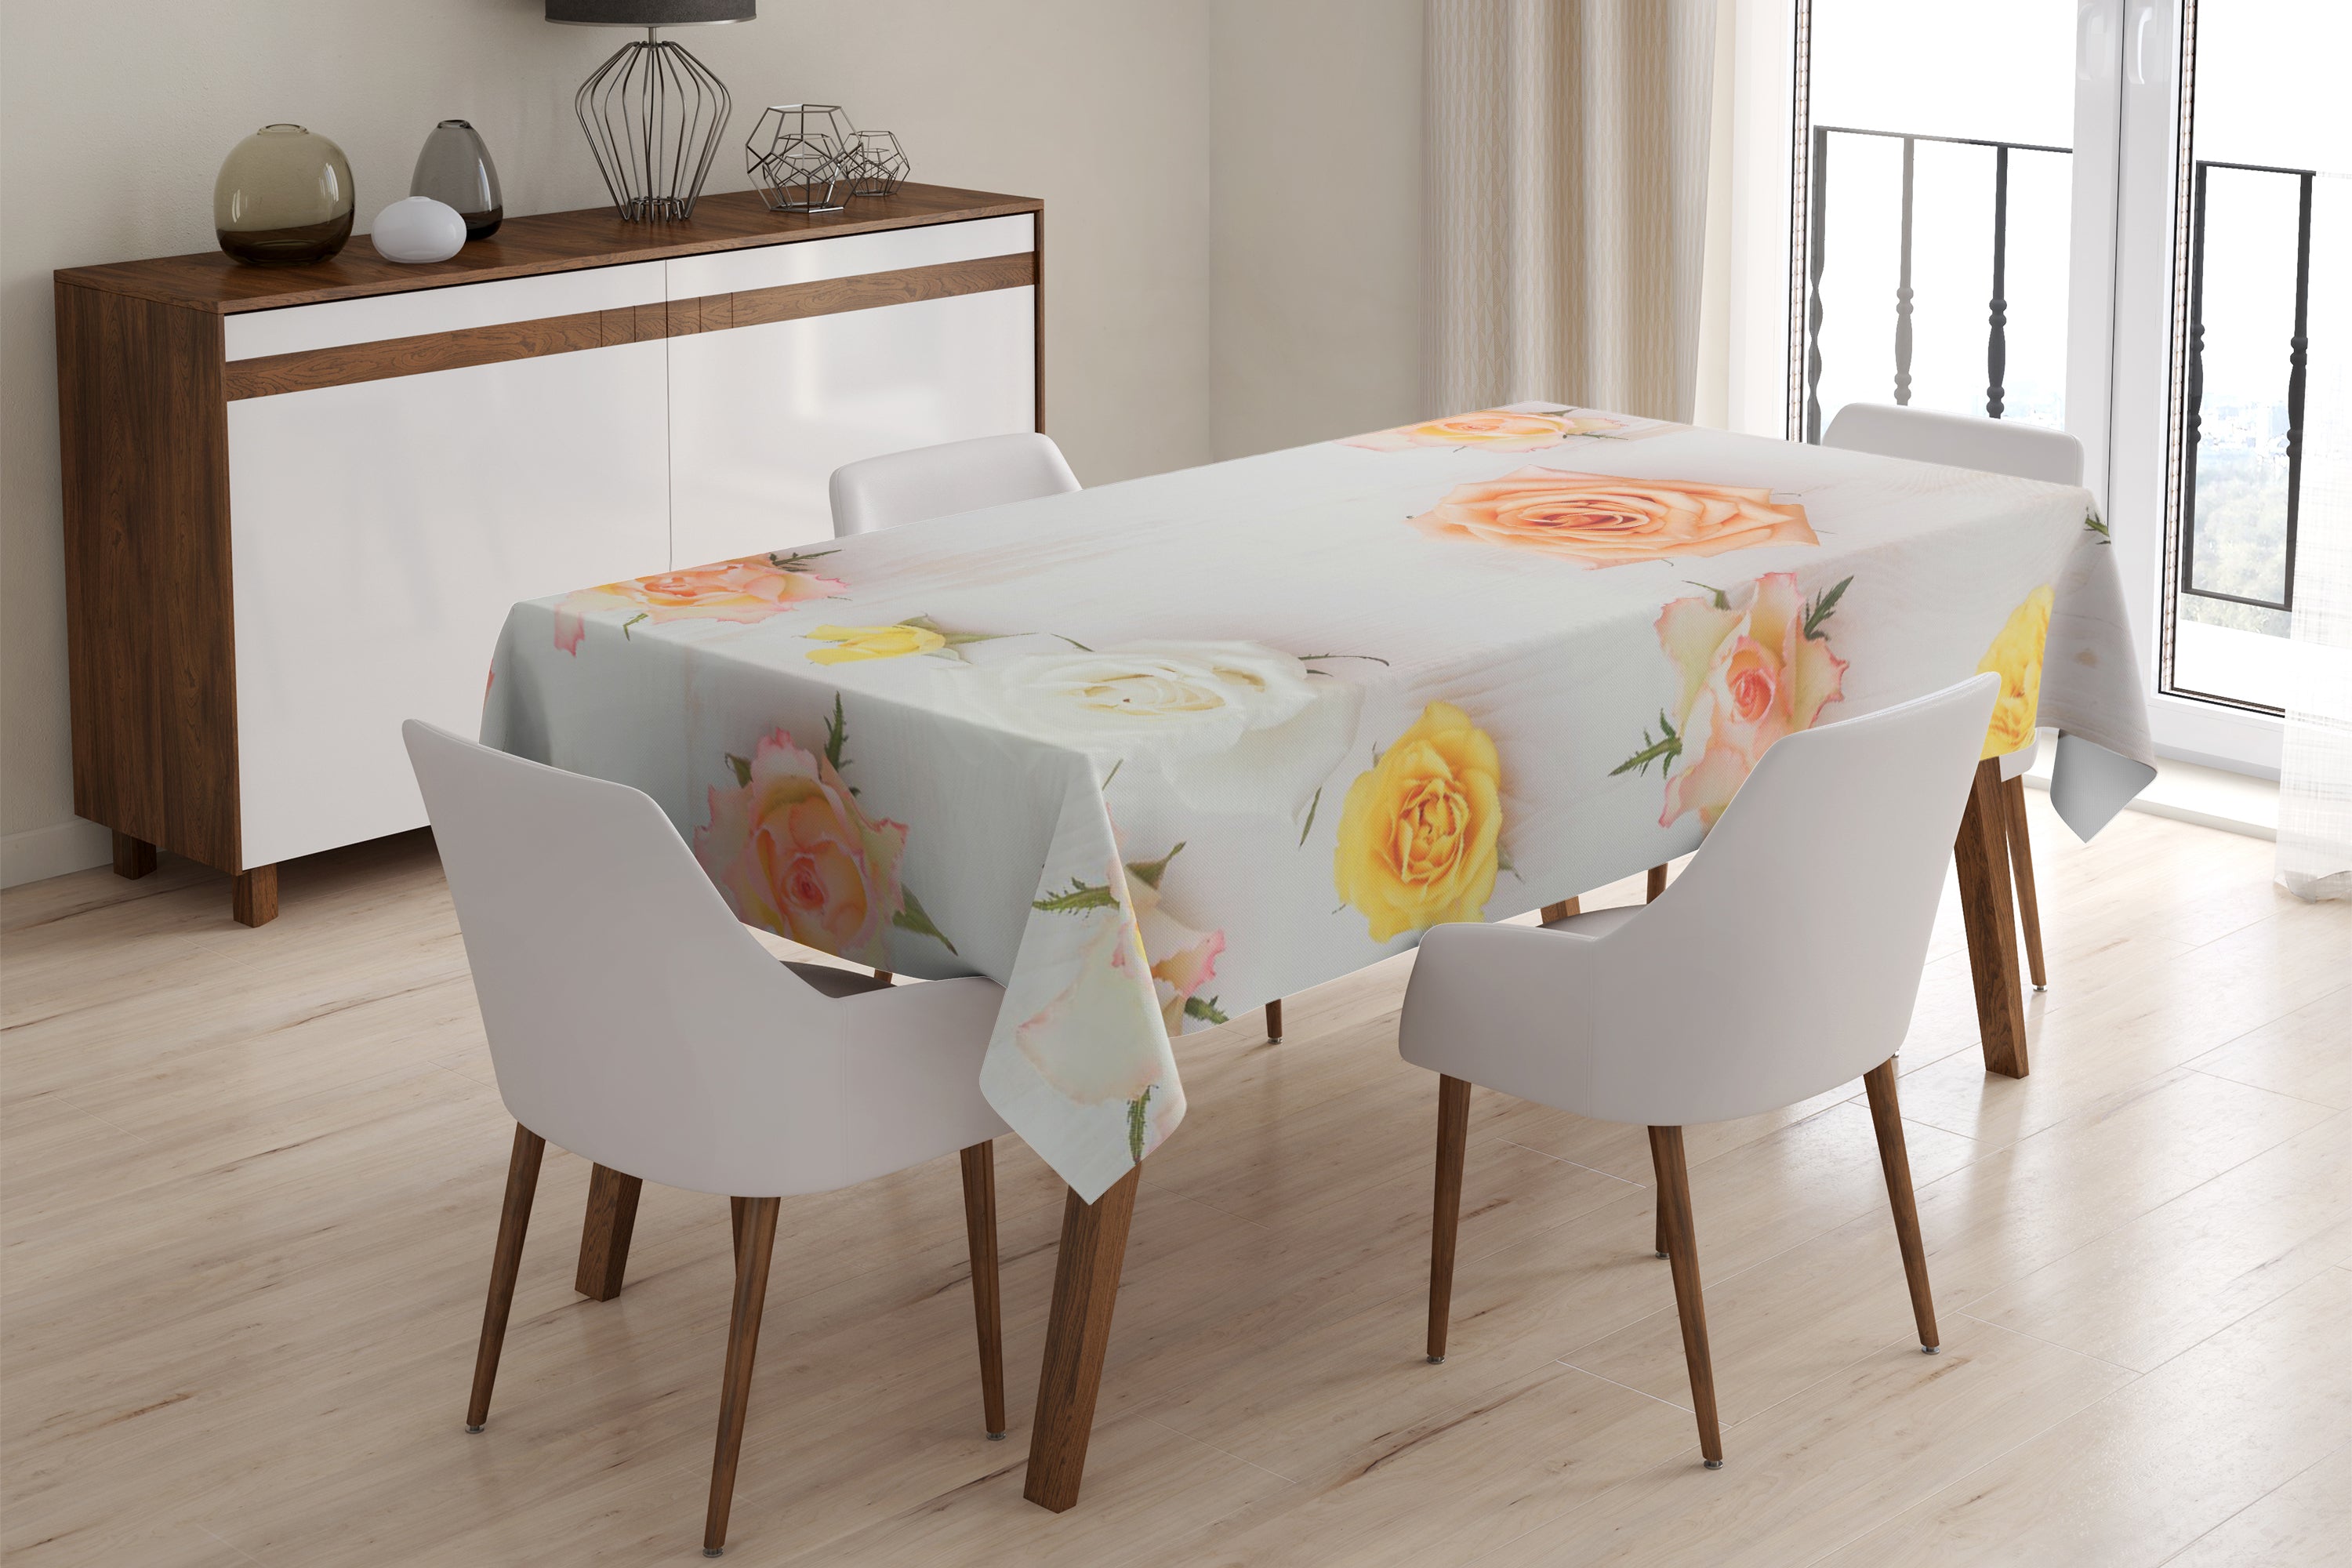 Tablecloth Roses on the board - Wellmira